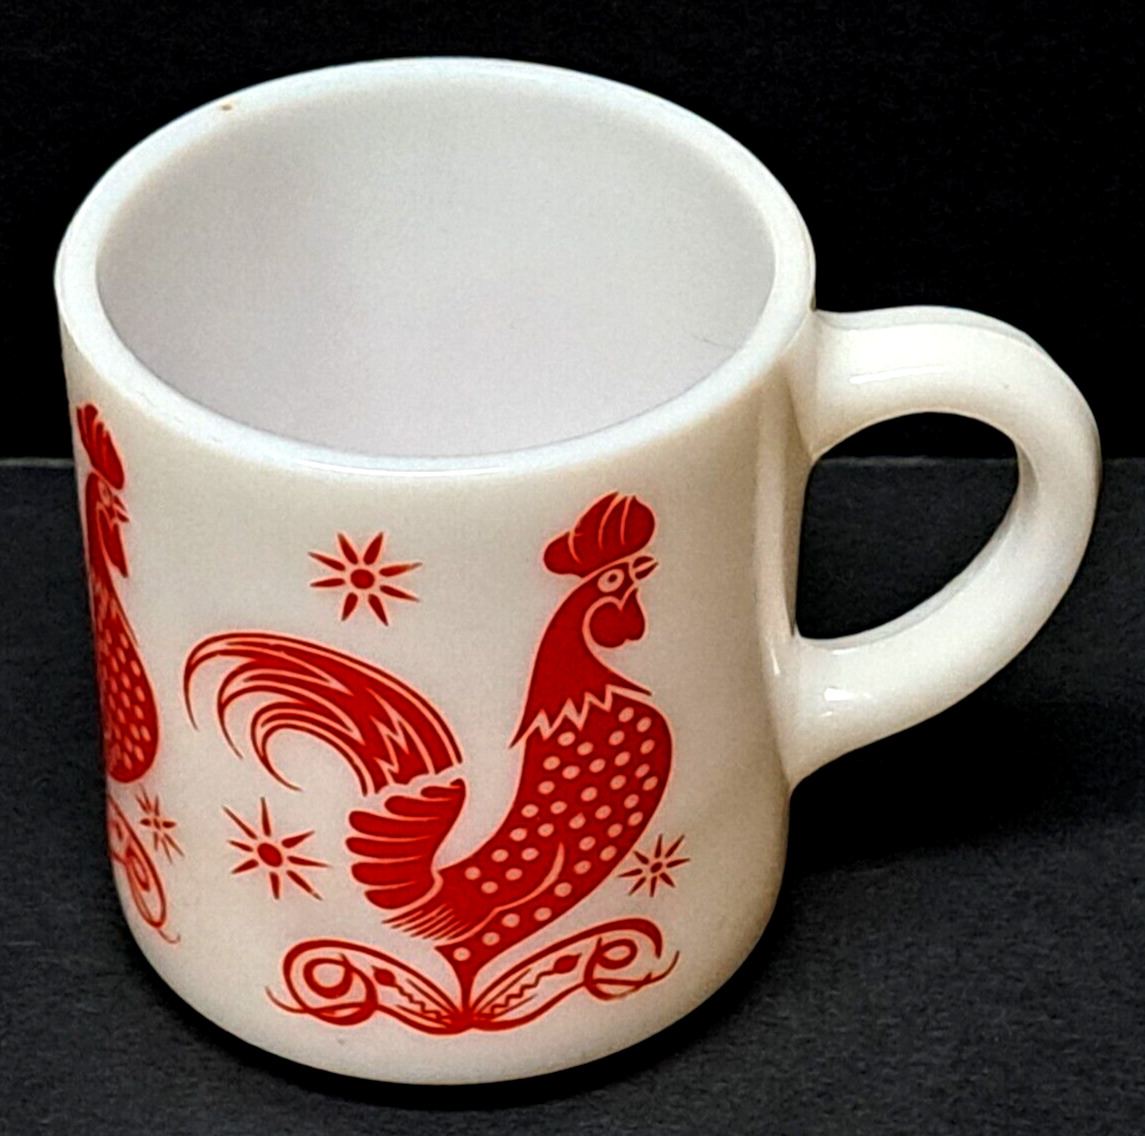 Vintage milk glass coffee mug with red roosters and handle unmarked